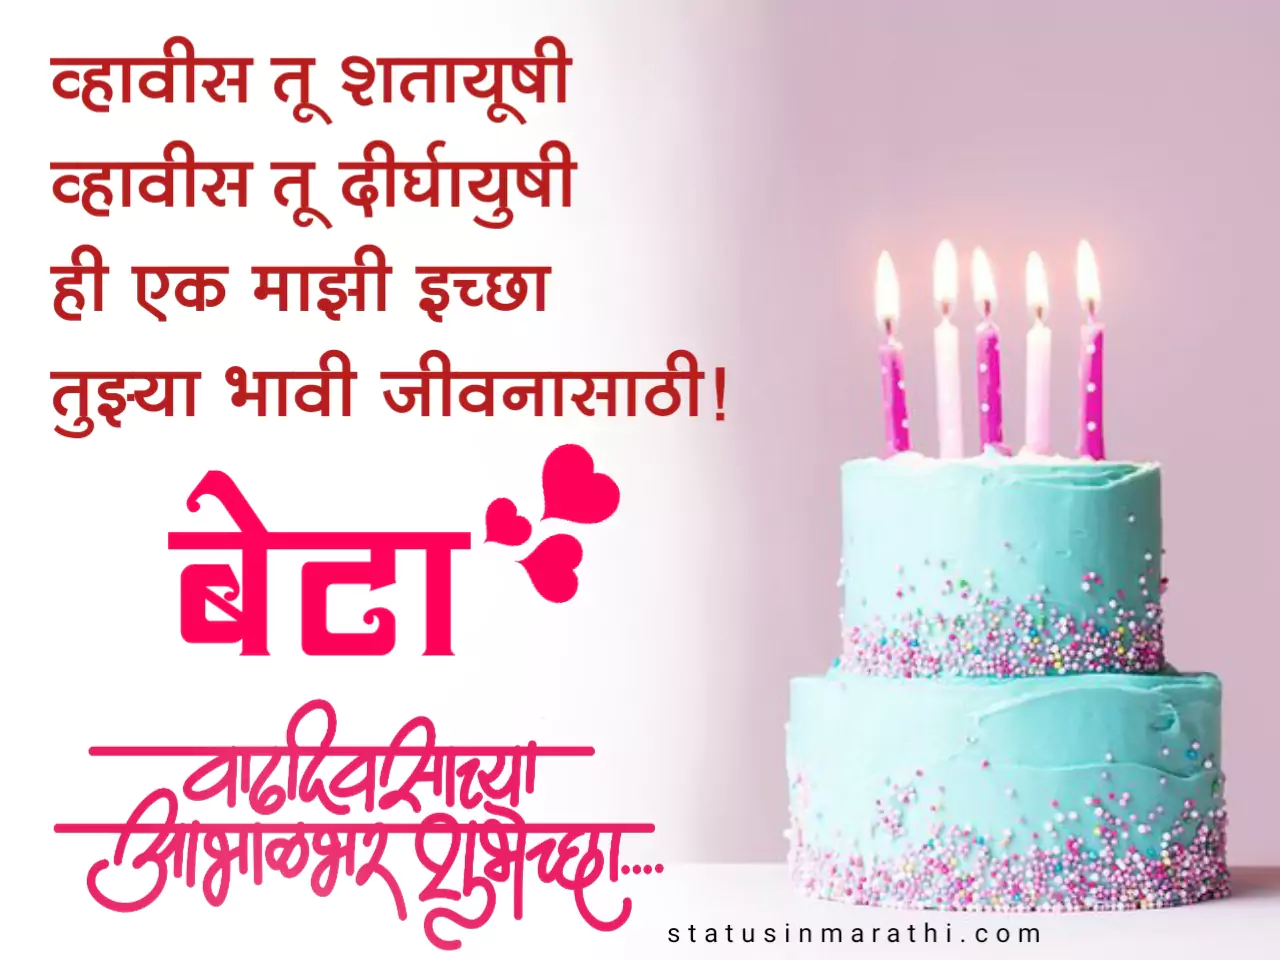 Happy Birthday wishes for daughter in marathi